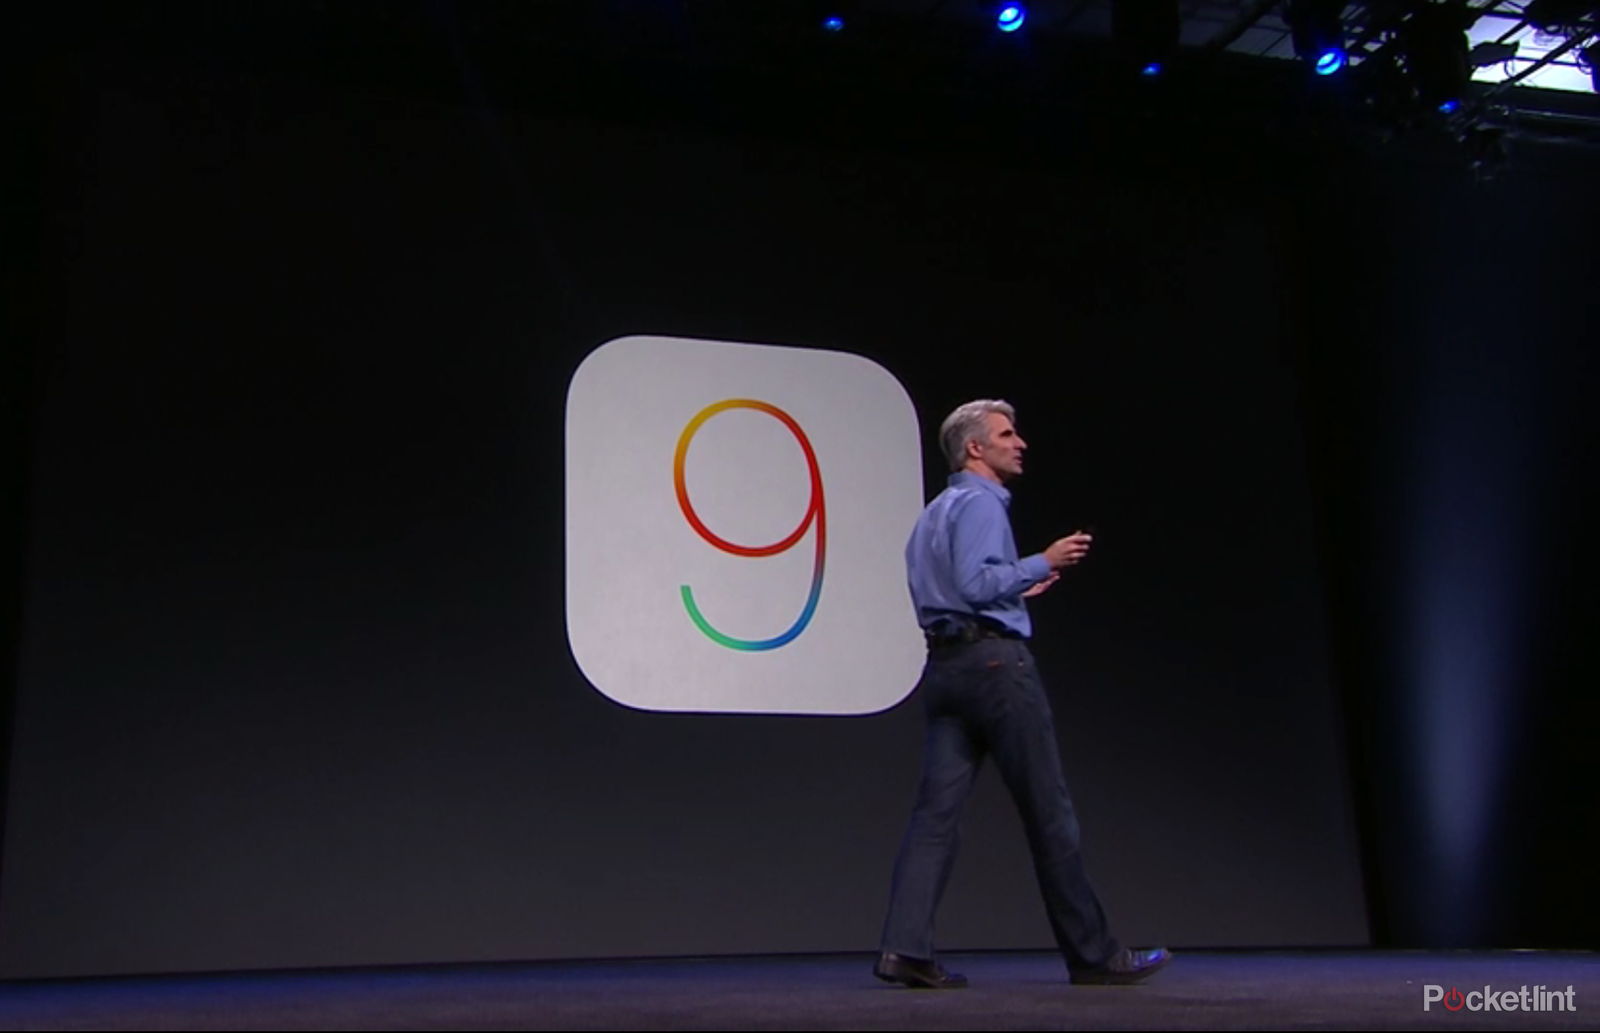 ios 9 new features detailed changes to siri advanced search apple pay and more image 1